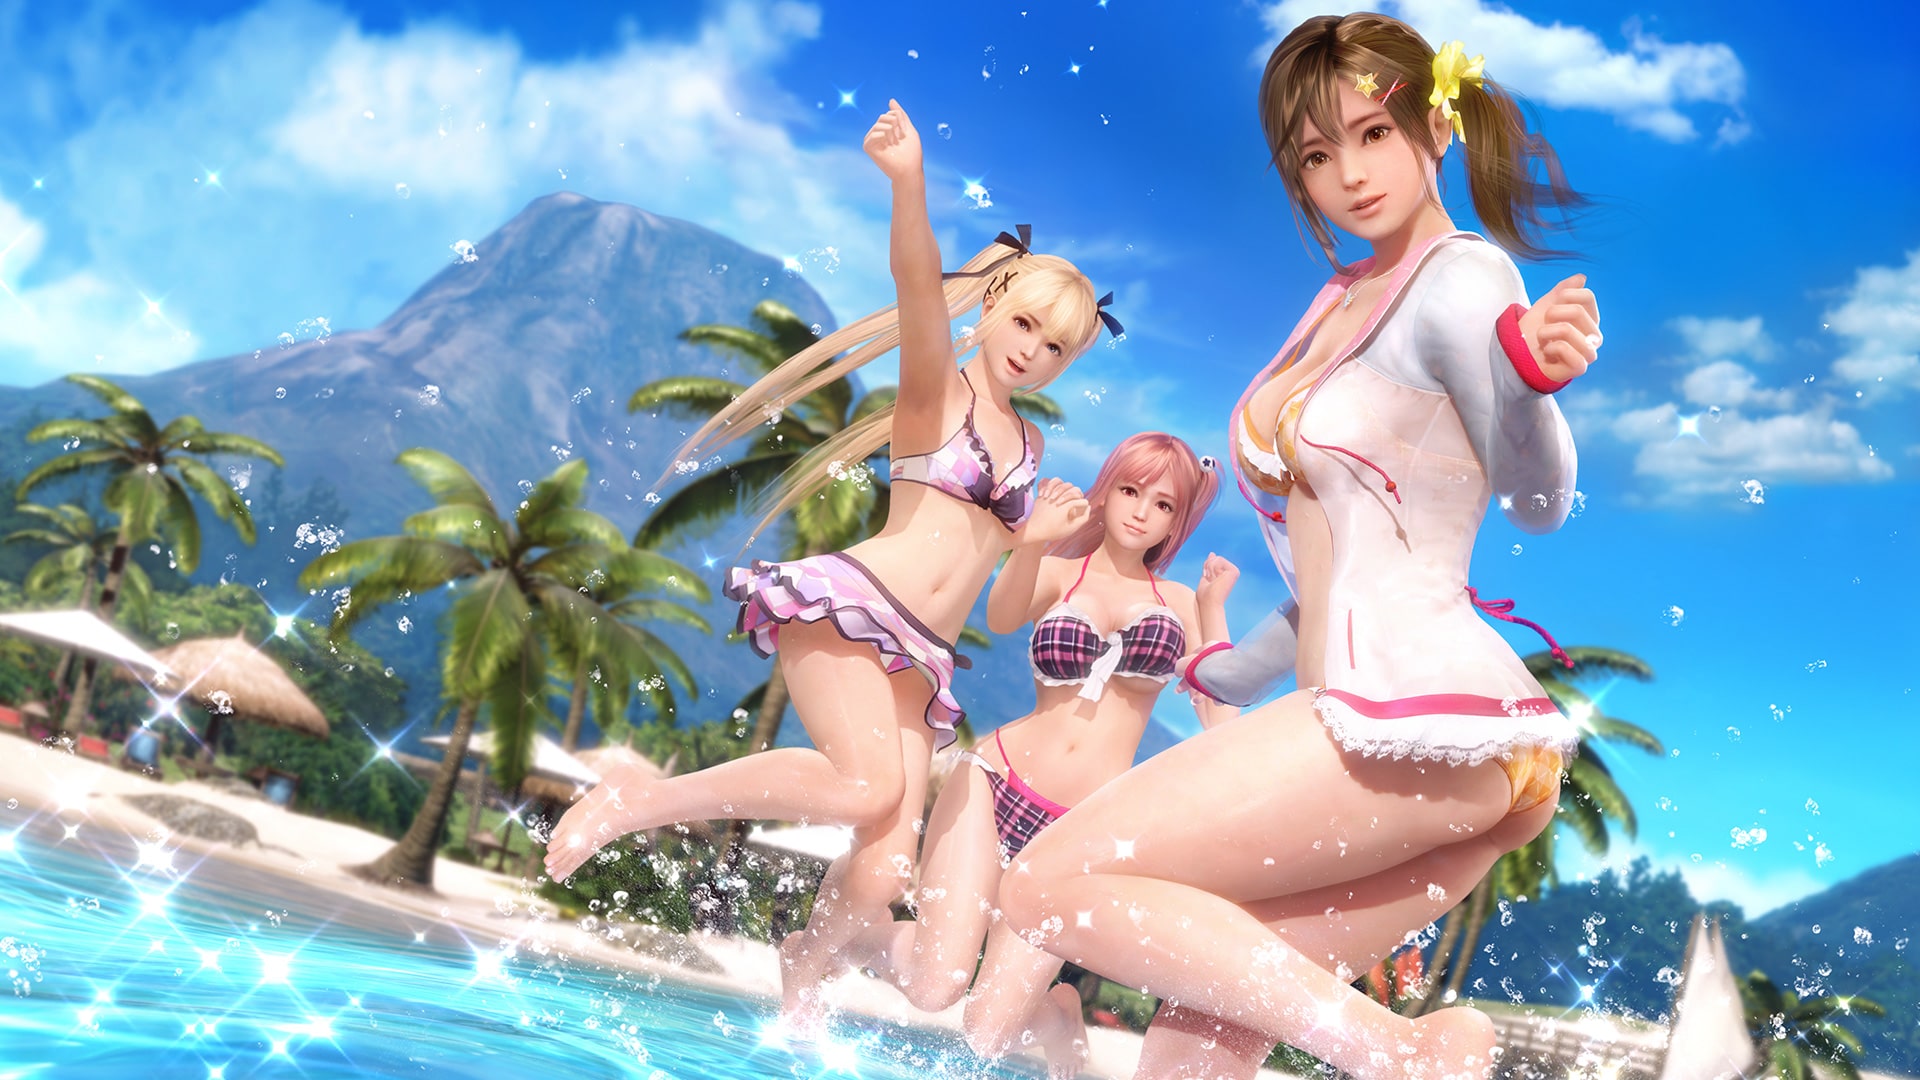 『DEAD OR ALIVE Xtreme 3 Scarlet』＆『VR 패스포트』 (한국어판)